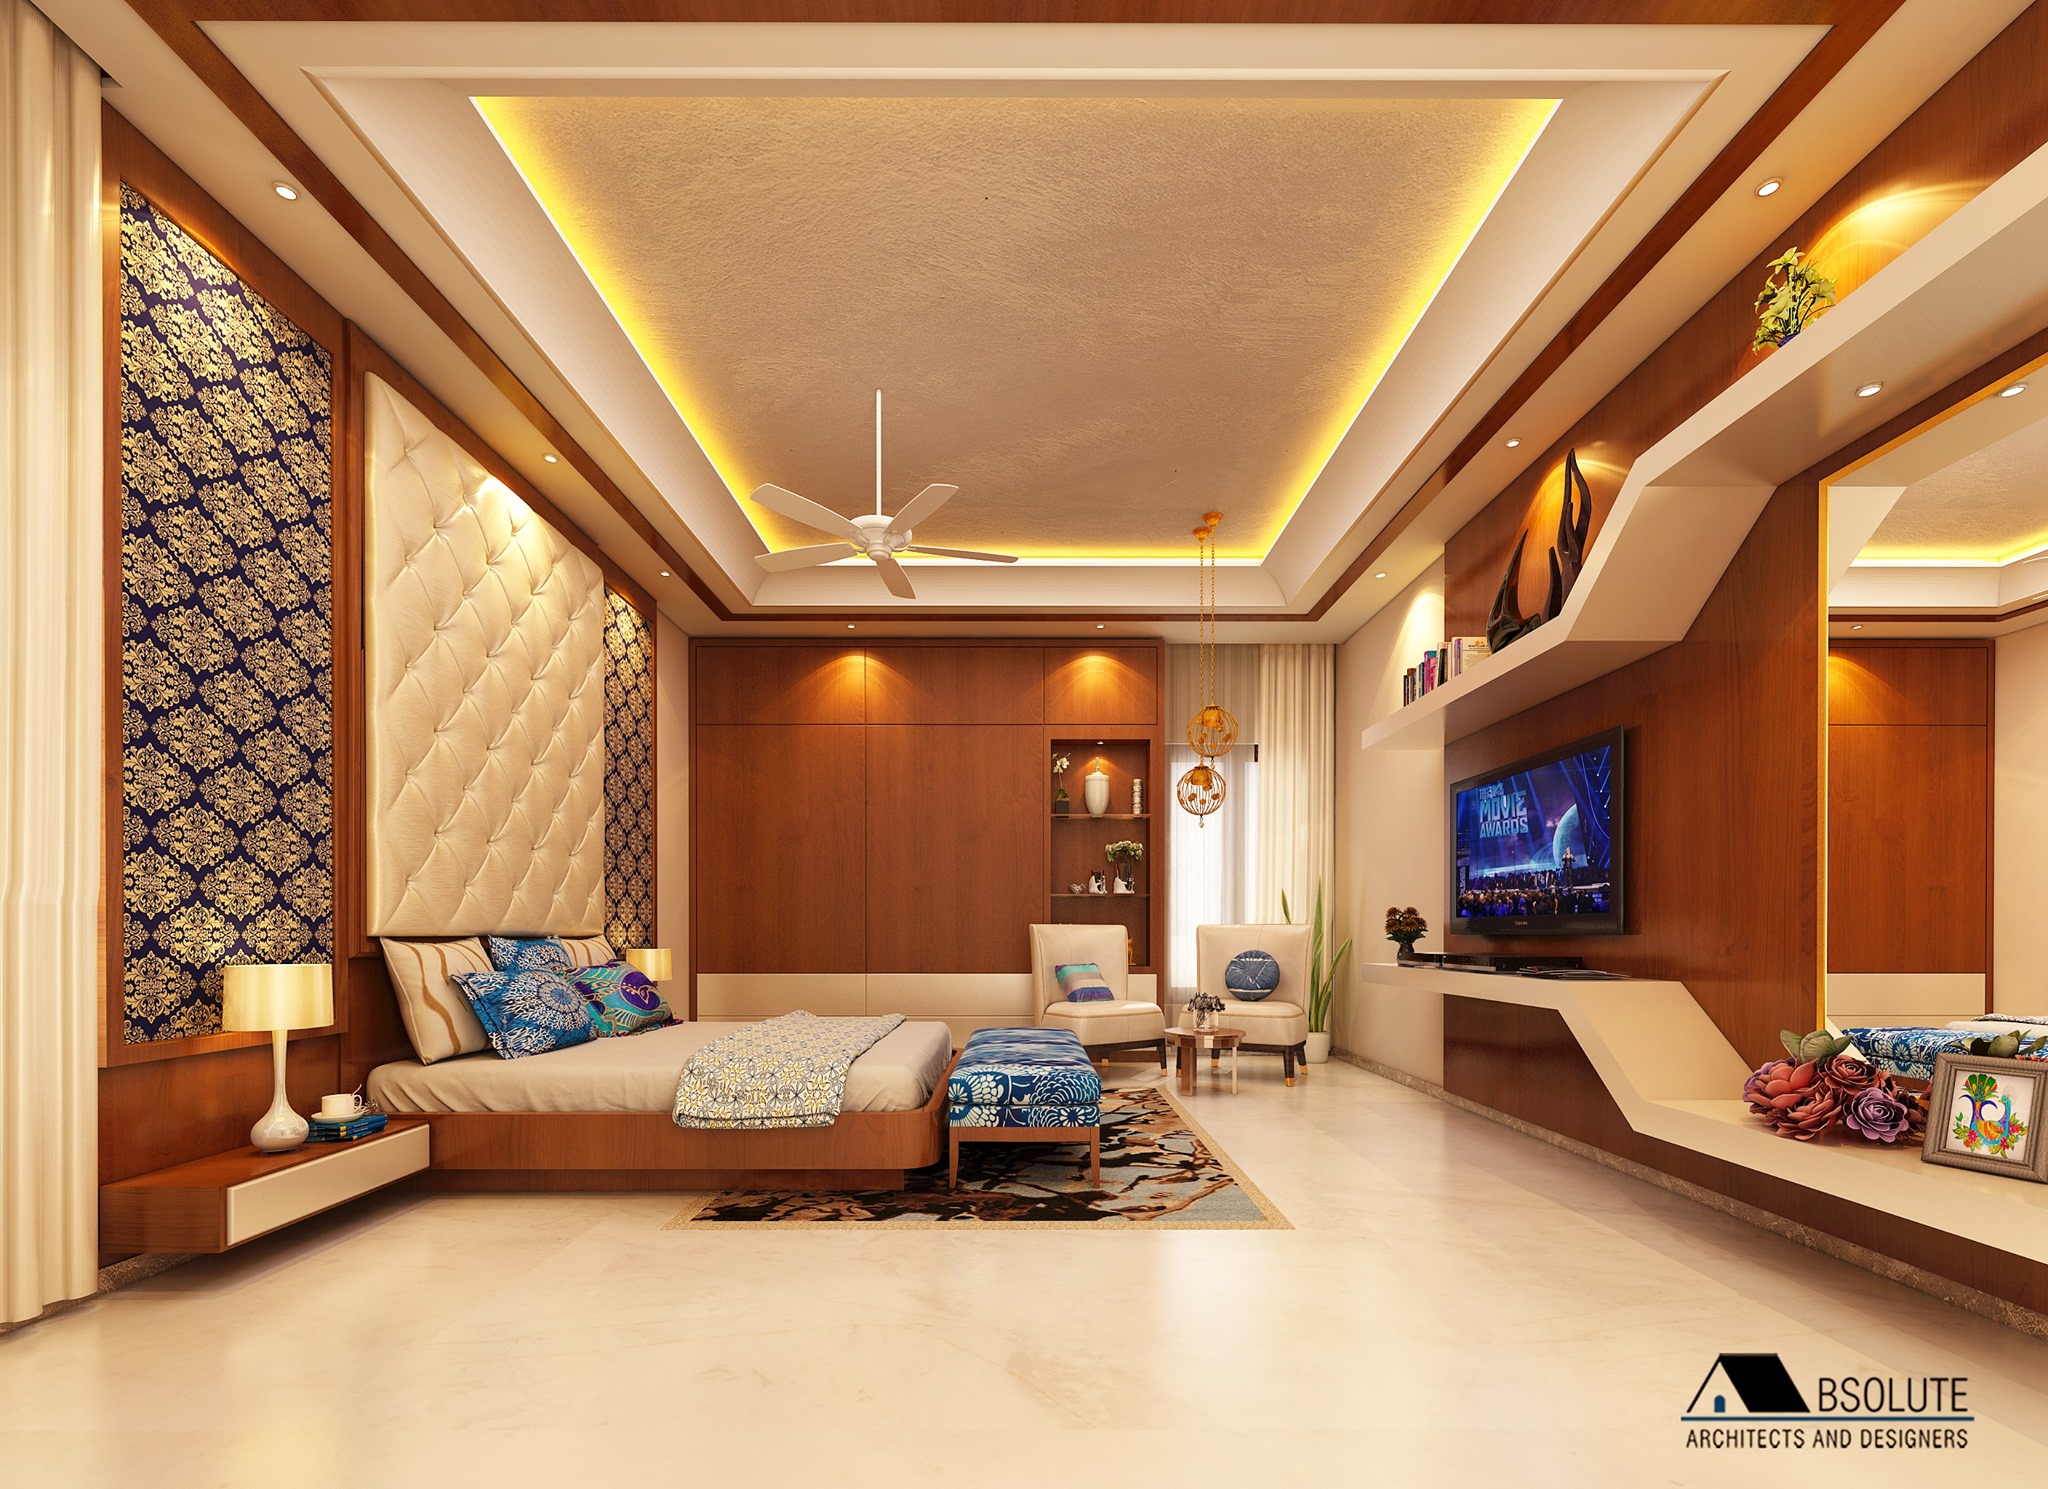 ABSOLUTE Architects and Designers Professional Services | Architect